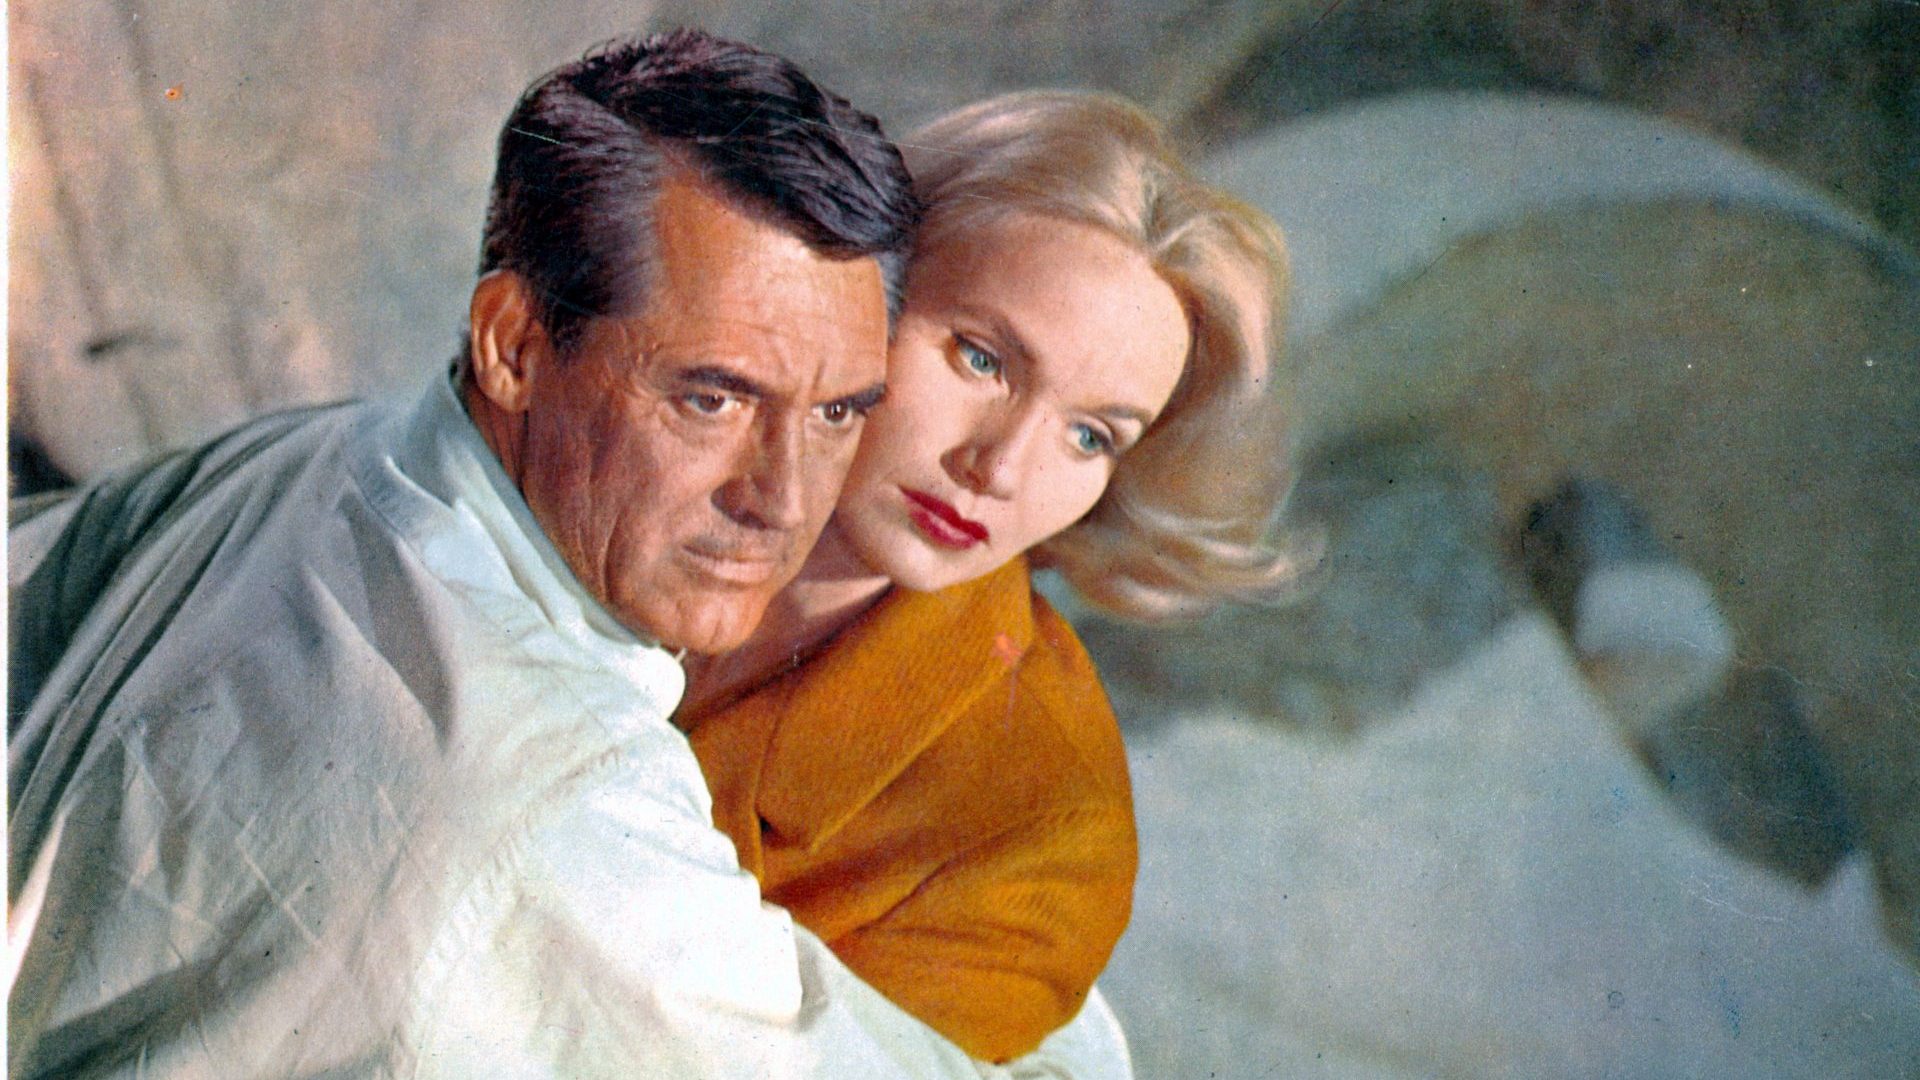 Cary Grant and Eva Marie Saint in
North by Northwest. Photo: MGM/Getty